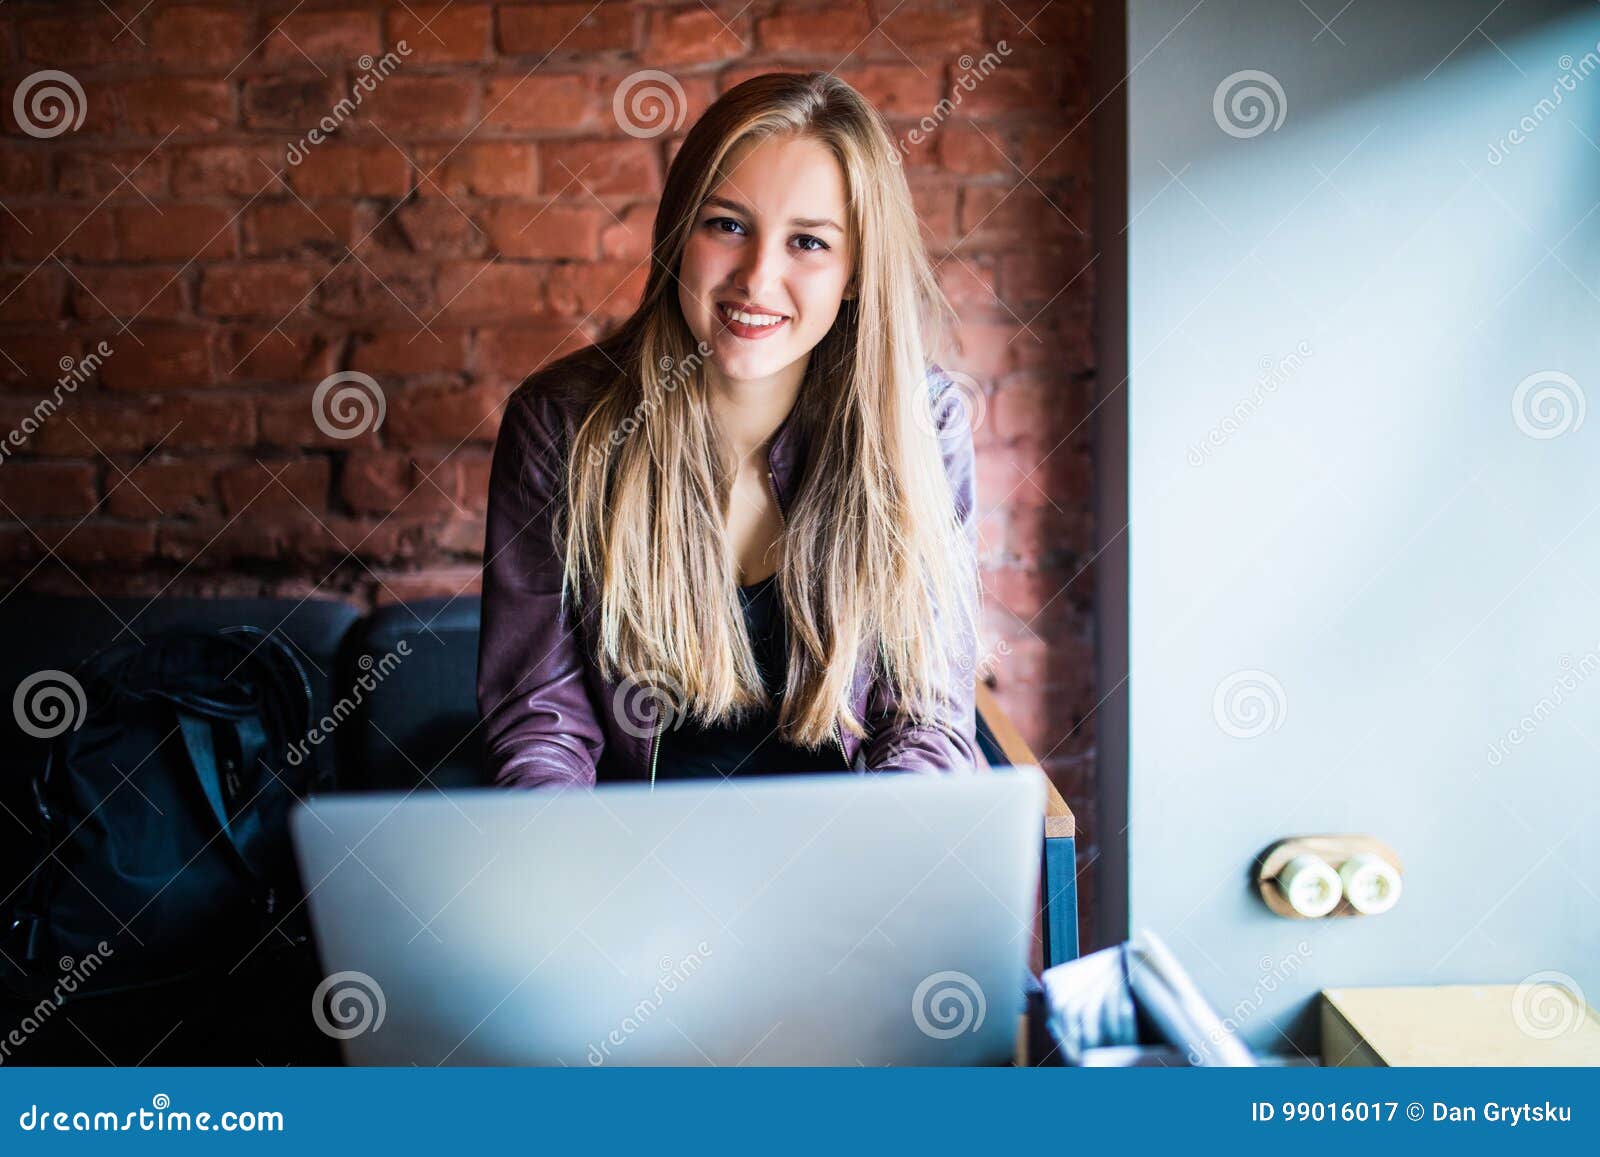 beautiful young freelancer woman using laptop computer sitting at cafe table. happy smiling girl working online or studying and le